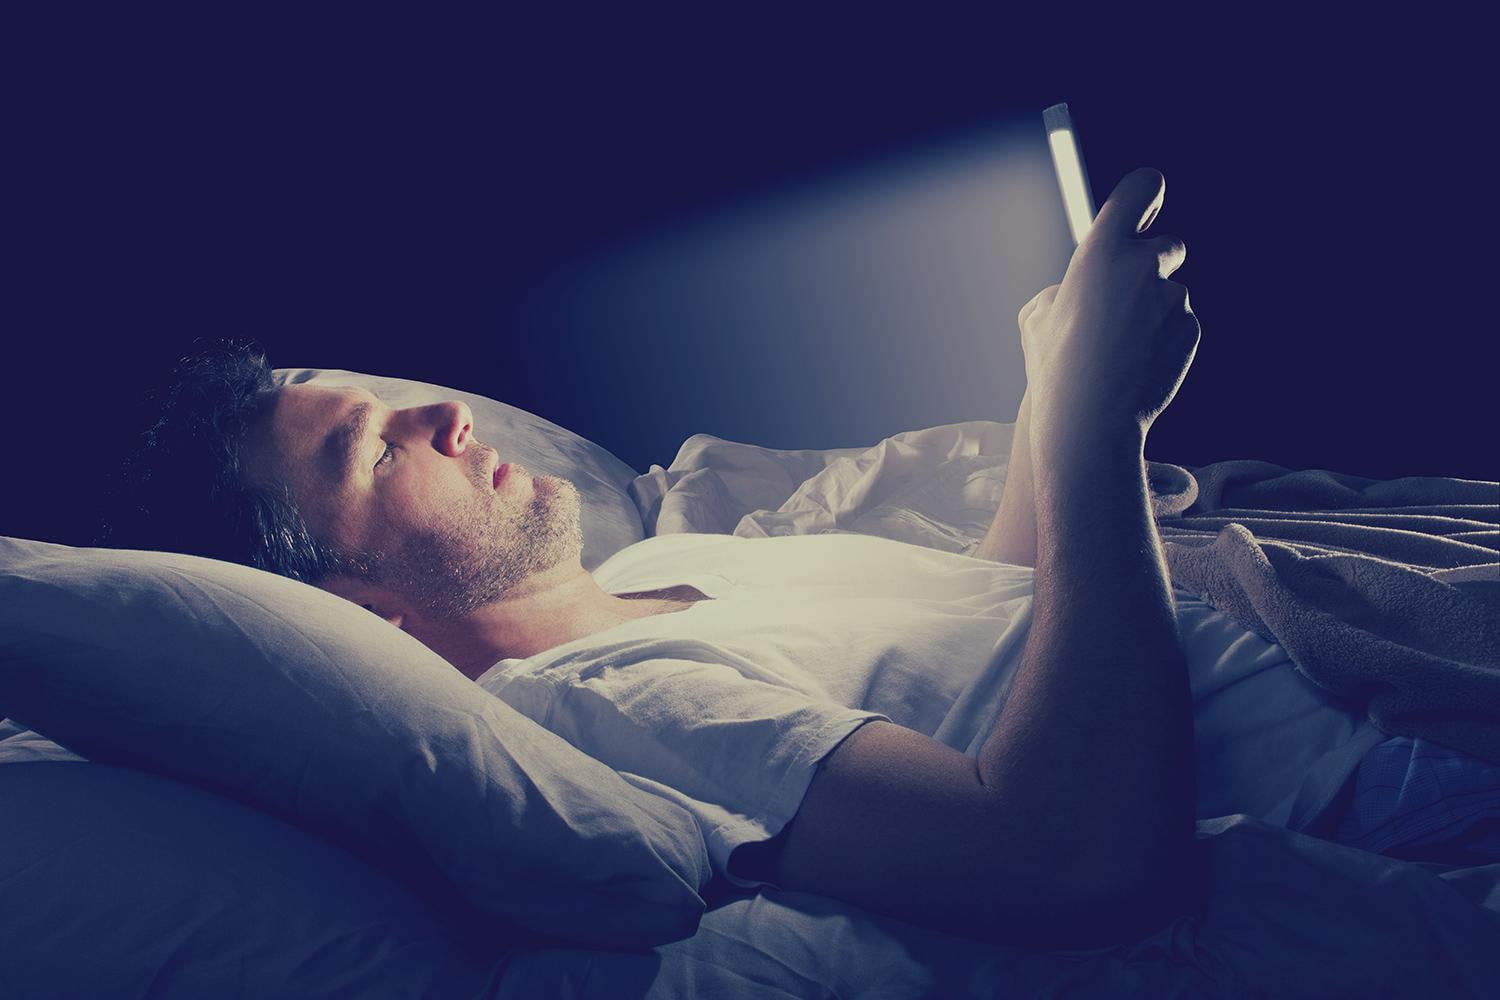 Bluelight emission from your smartphone can lead to a disturbed sleep cycle